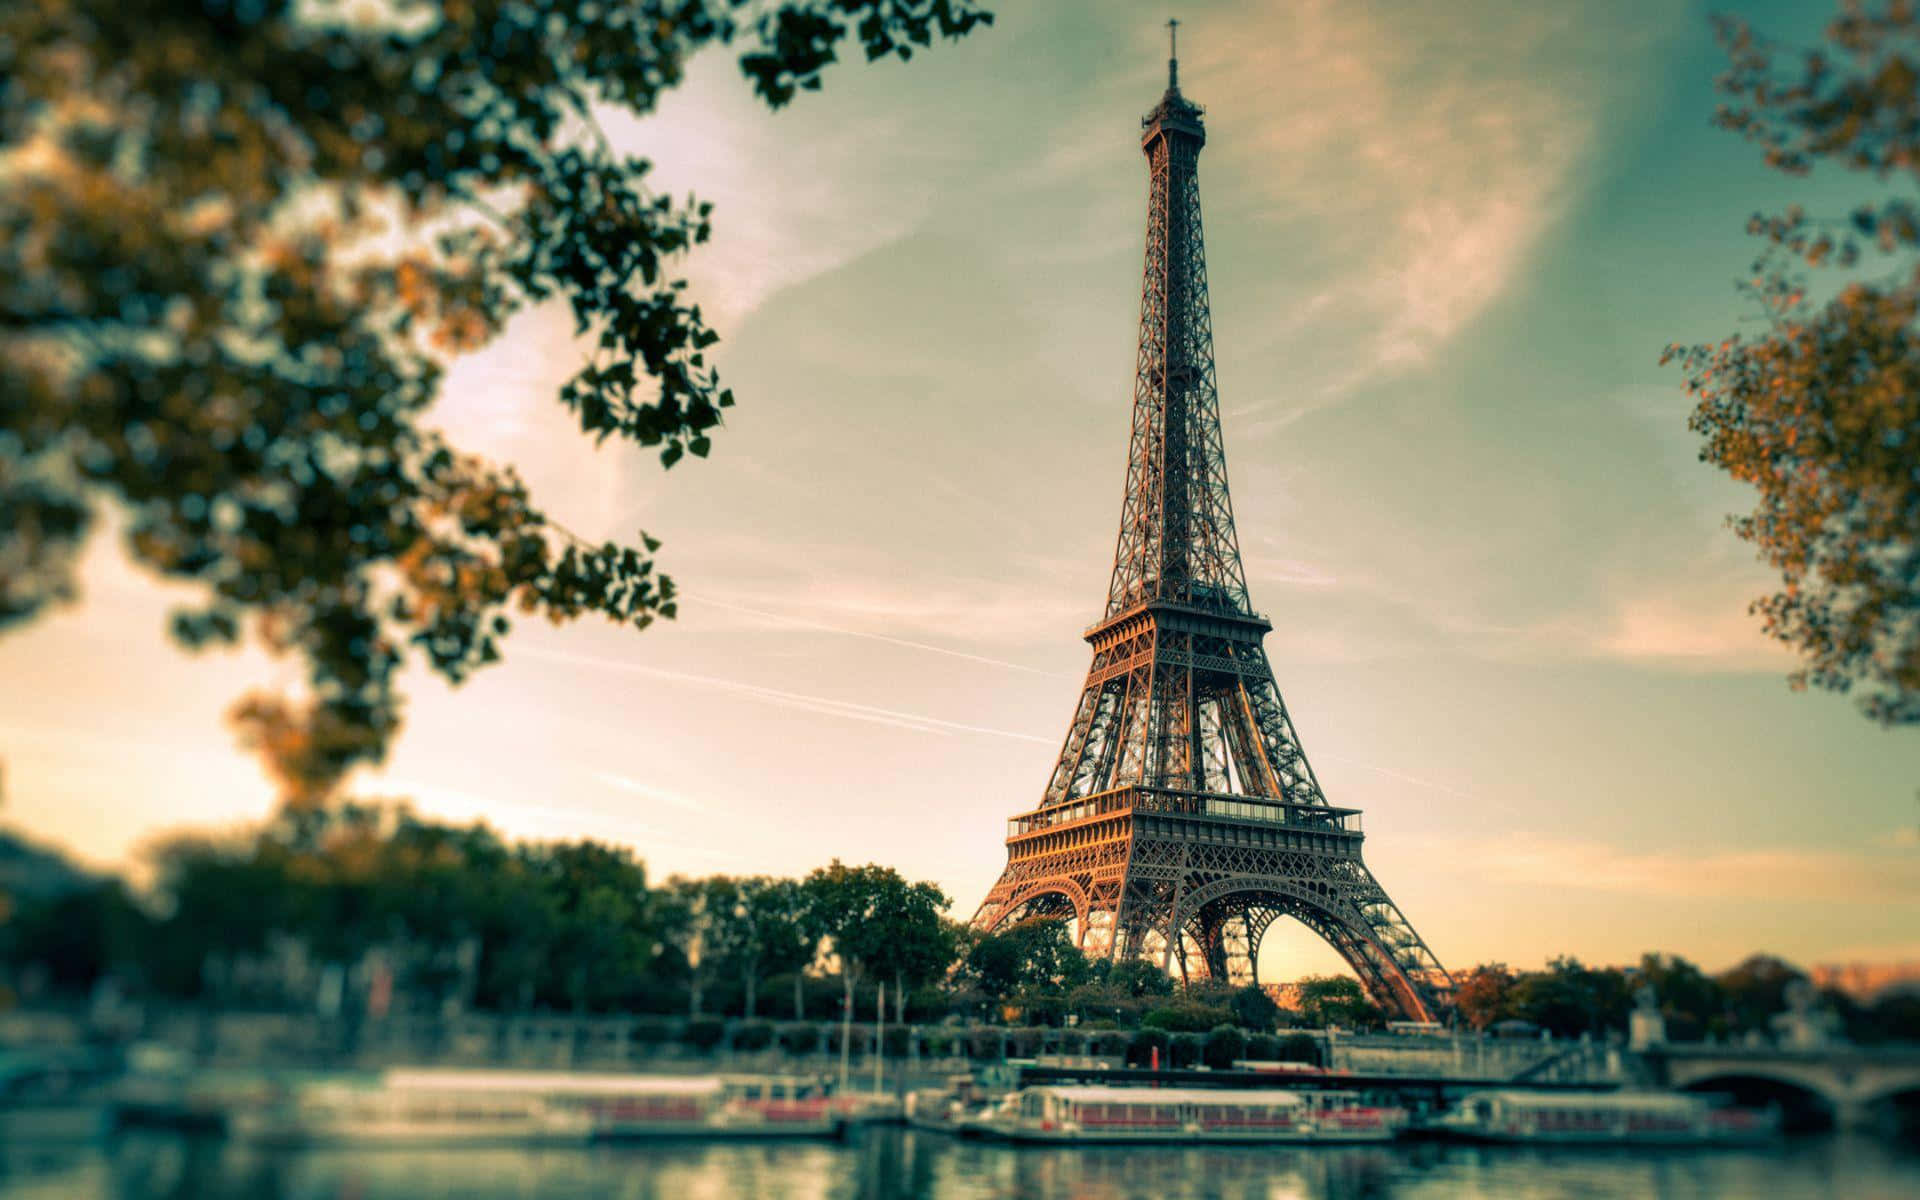 The Eiffel Tower Is Seen In The Background Of A River